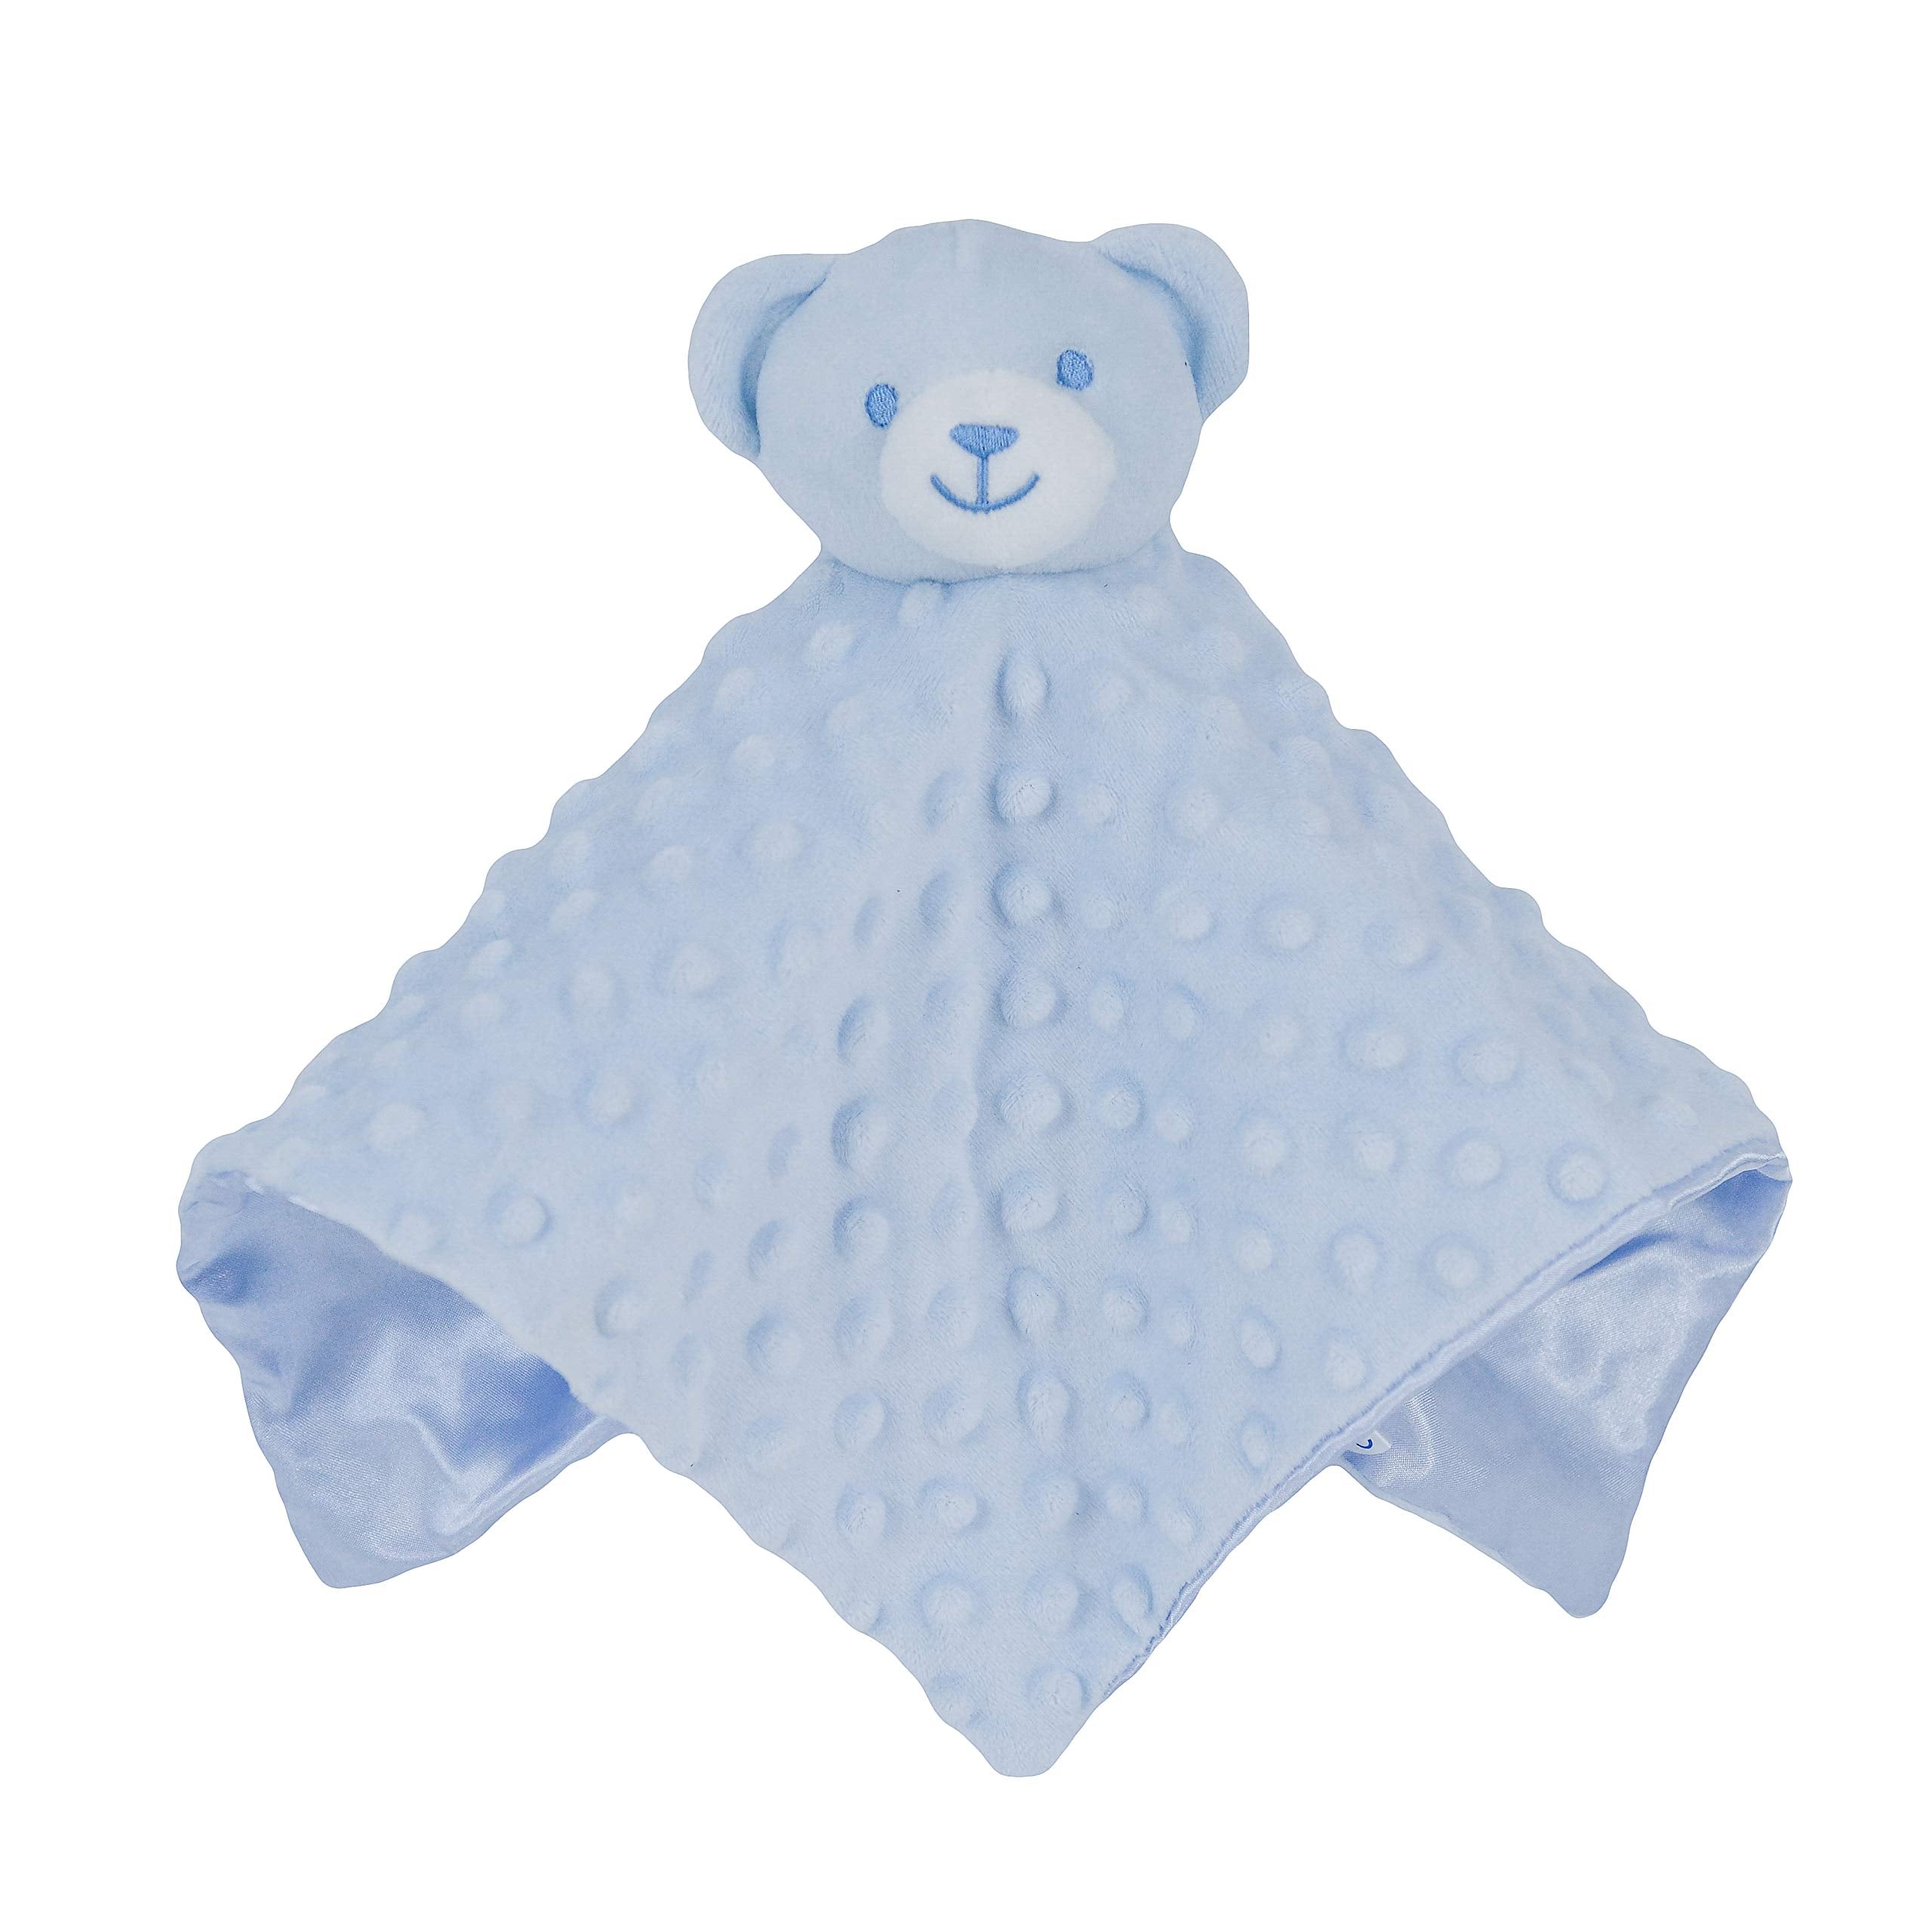 Blue Soft Soother Stuffed Plush Bear Animal Baby Comforter Toy Blanket | New Born Baby Girl and Boy Infant Toddler Cuddle Snuggle Toy Blankets for Nursery Strollers, Cots, Cribs, Car Seats